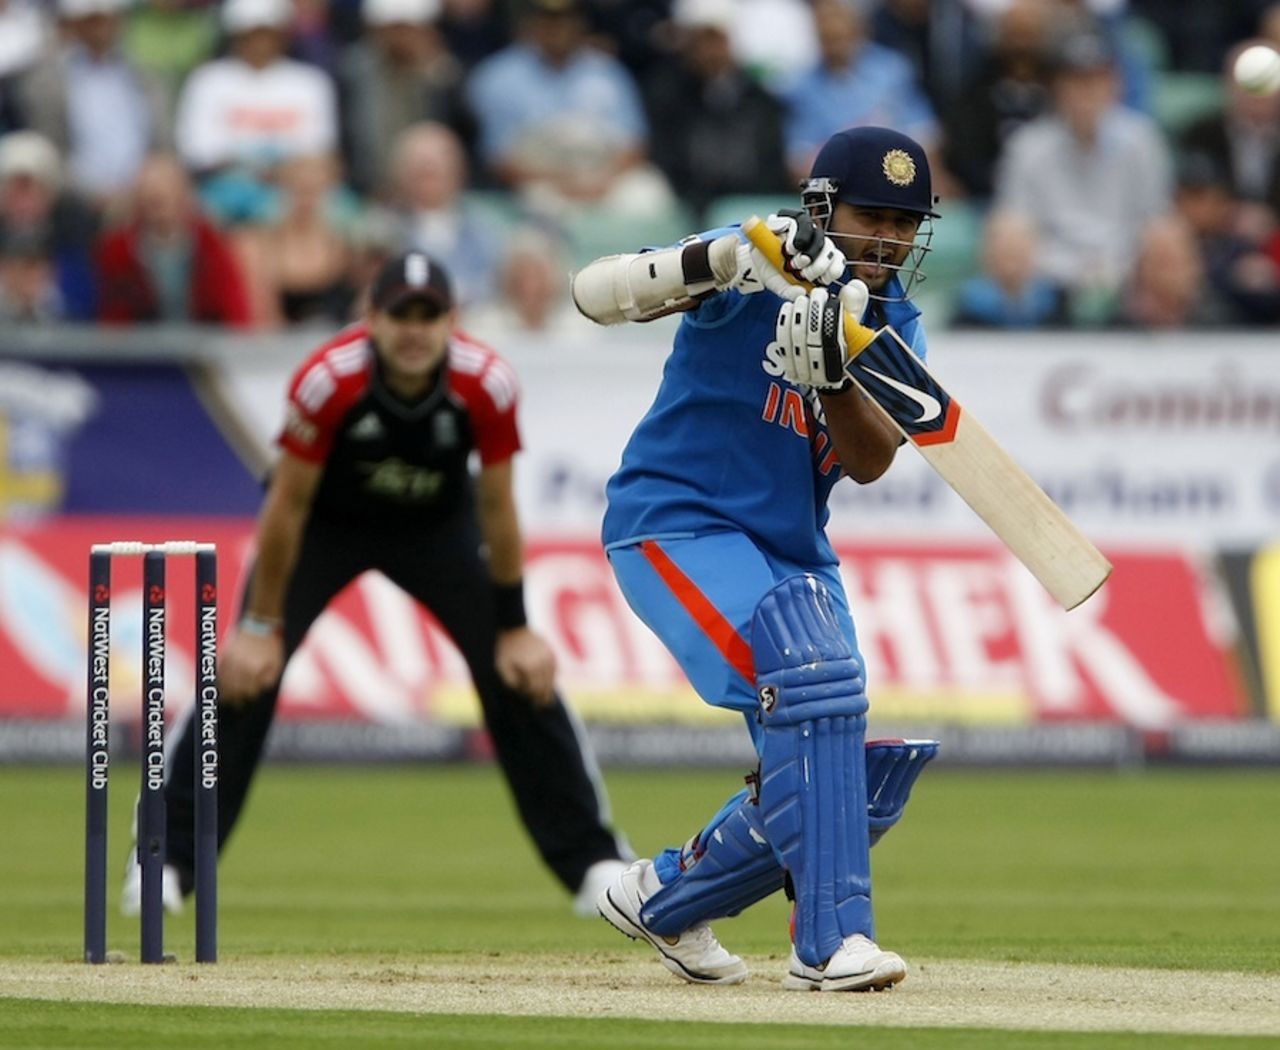 Parthiv Patel calls after playing the ball, England v India, 1st ODI, Chester-le-Street, September 3, 2011